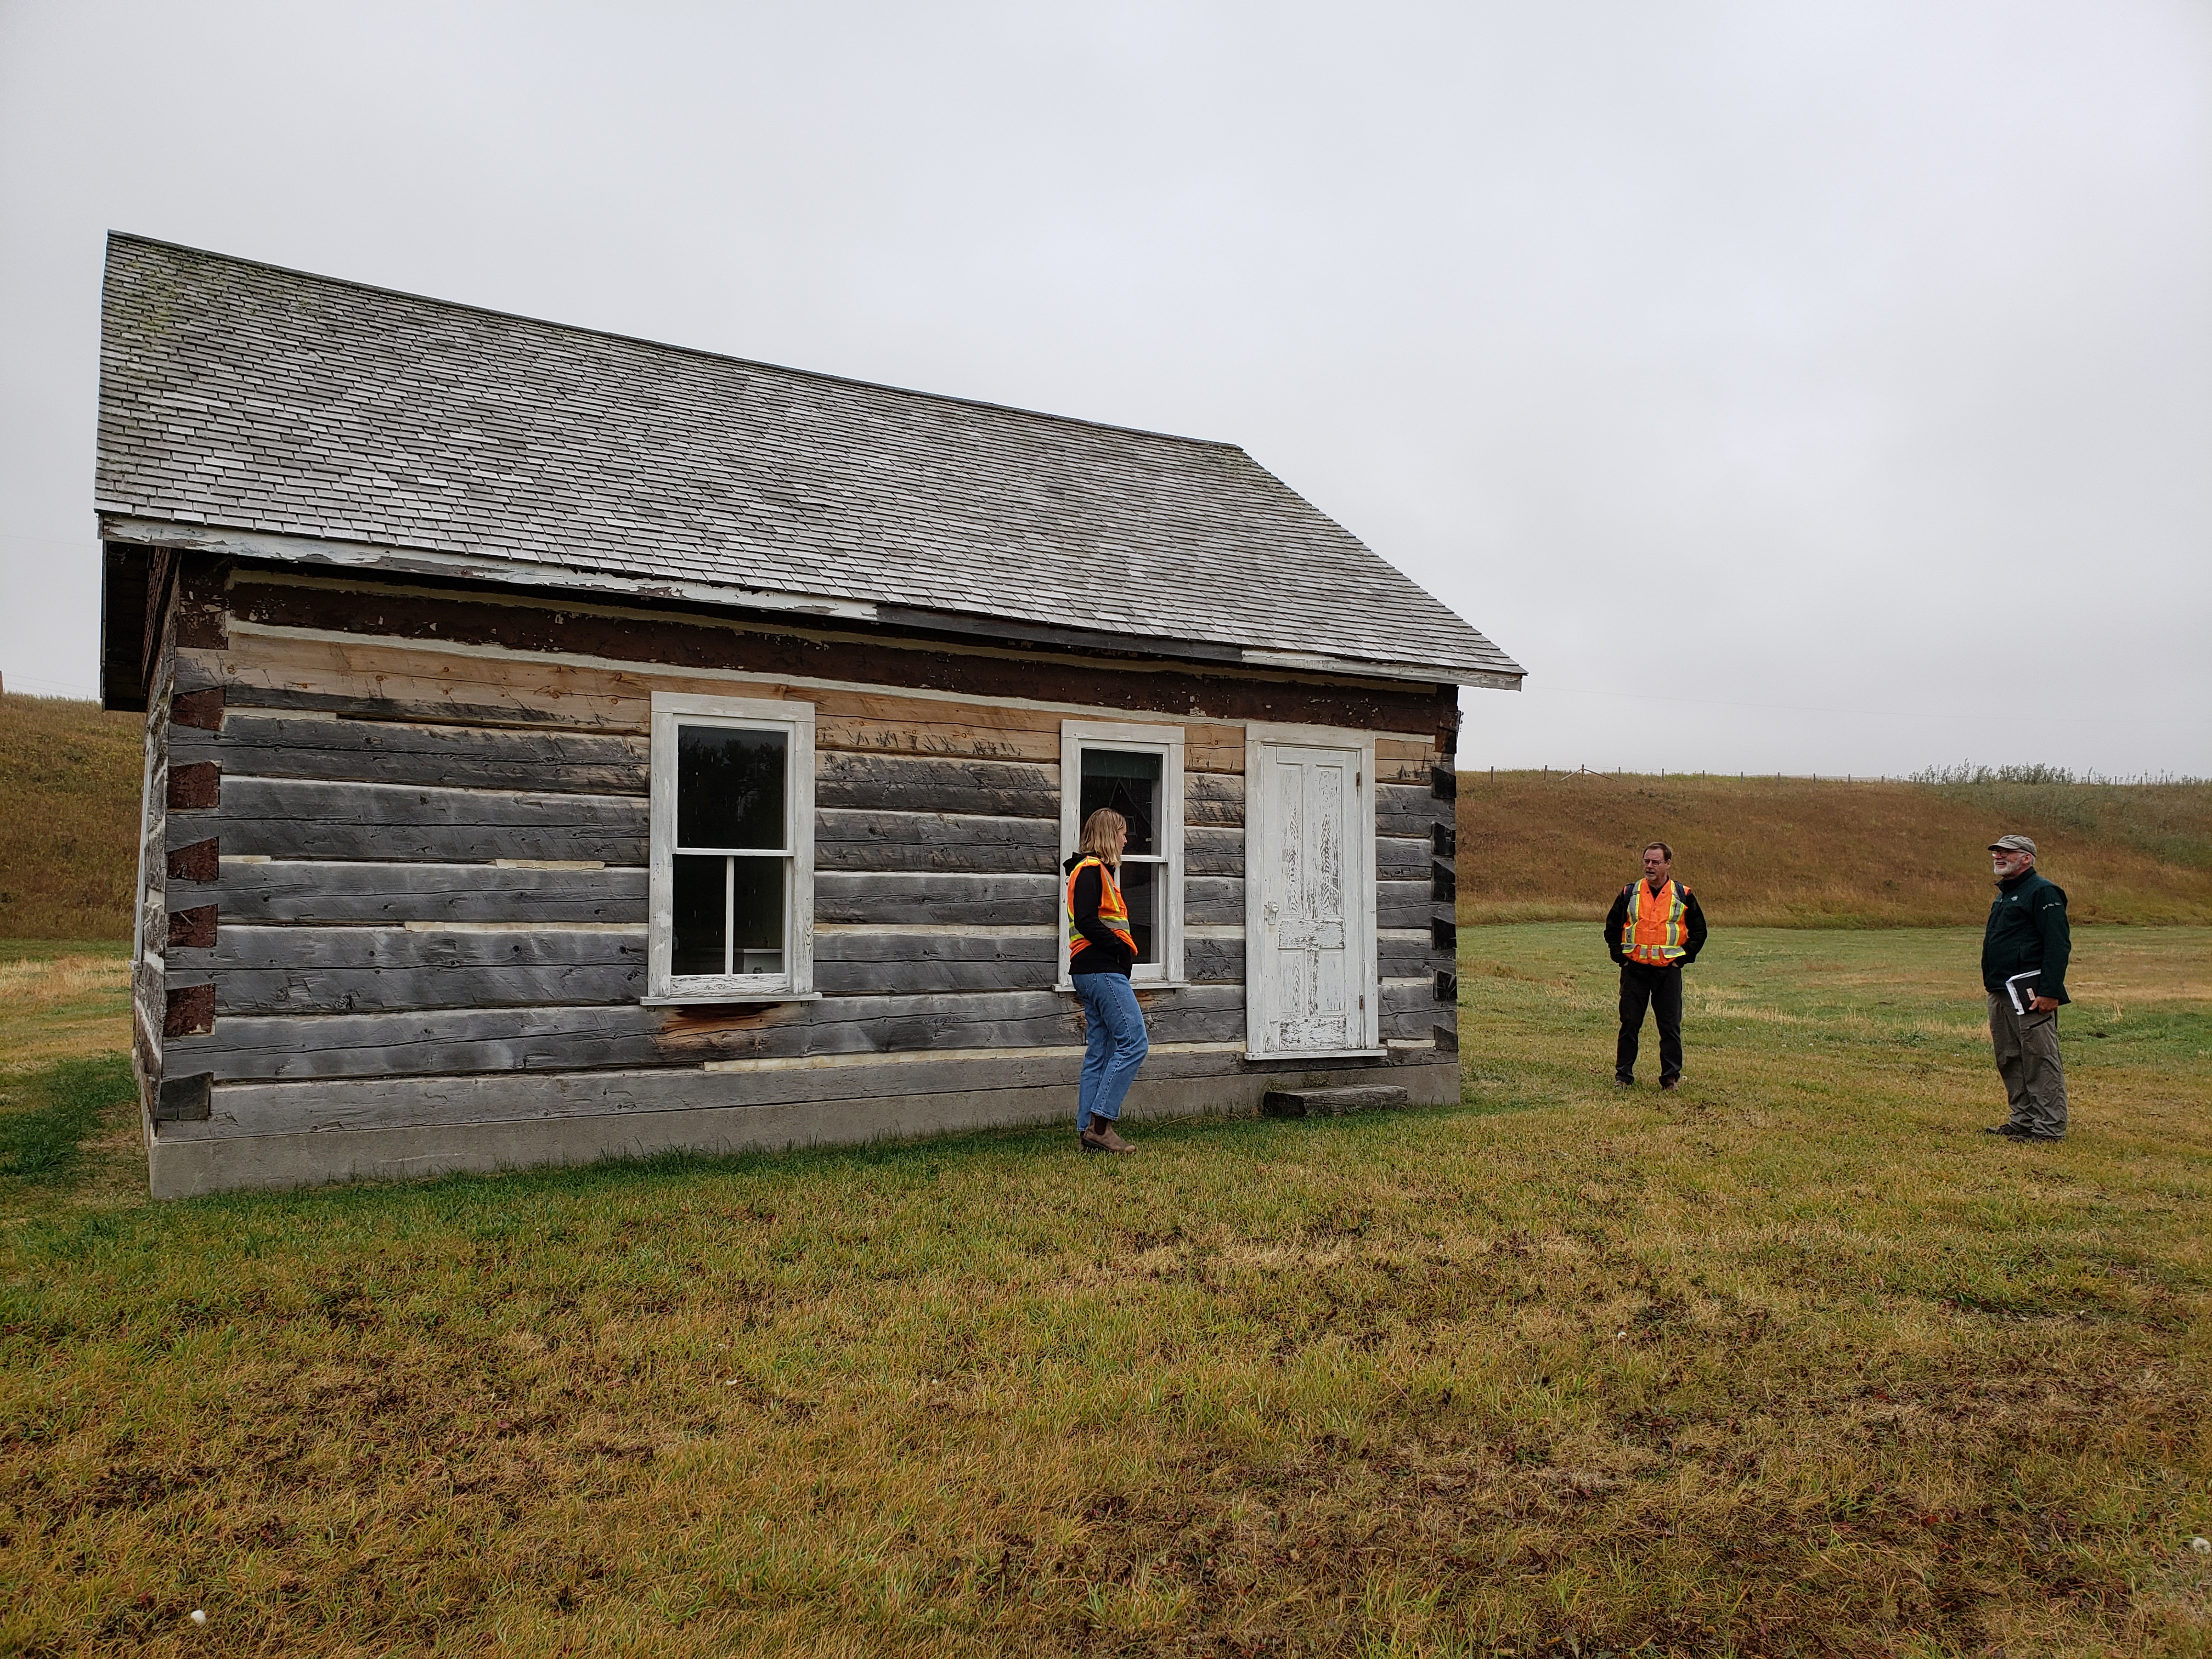 Outside Foreman's House with the Capture2Preserve team and Parks Canada staff, preparing to scan the building.